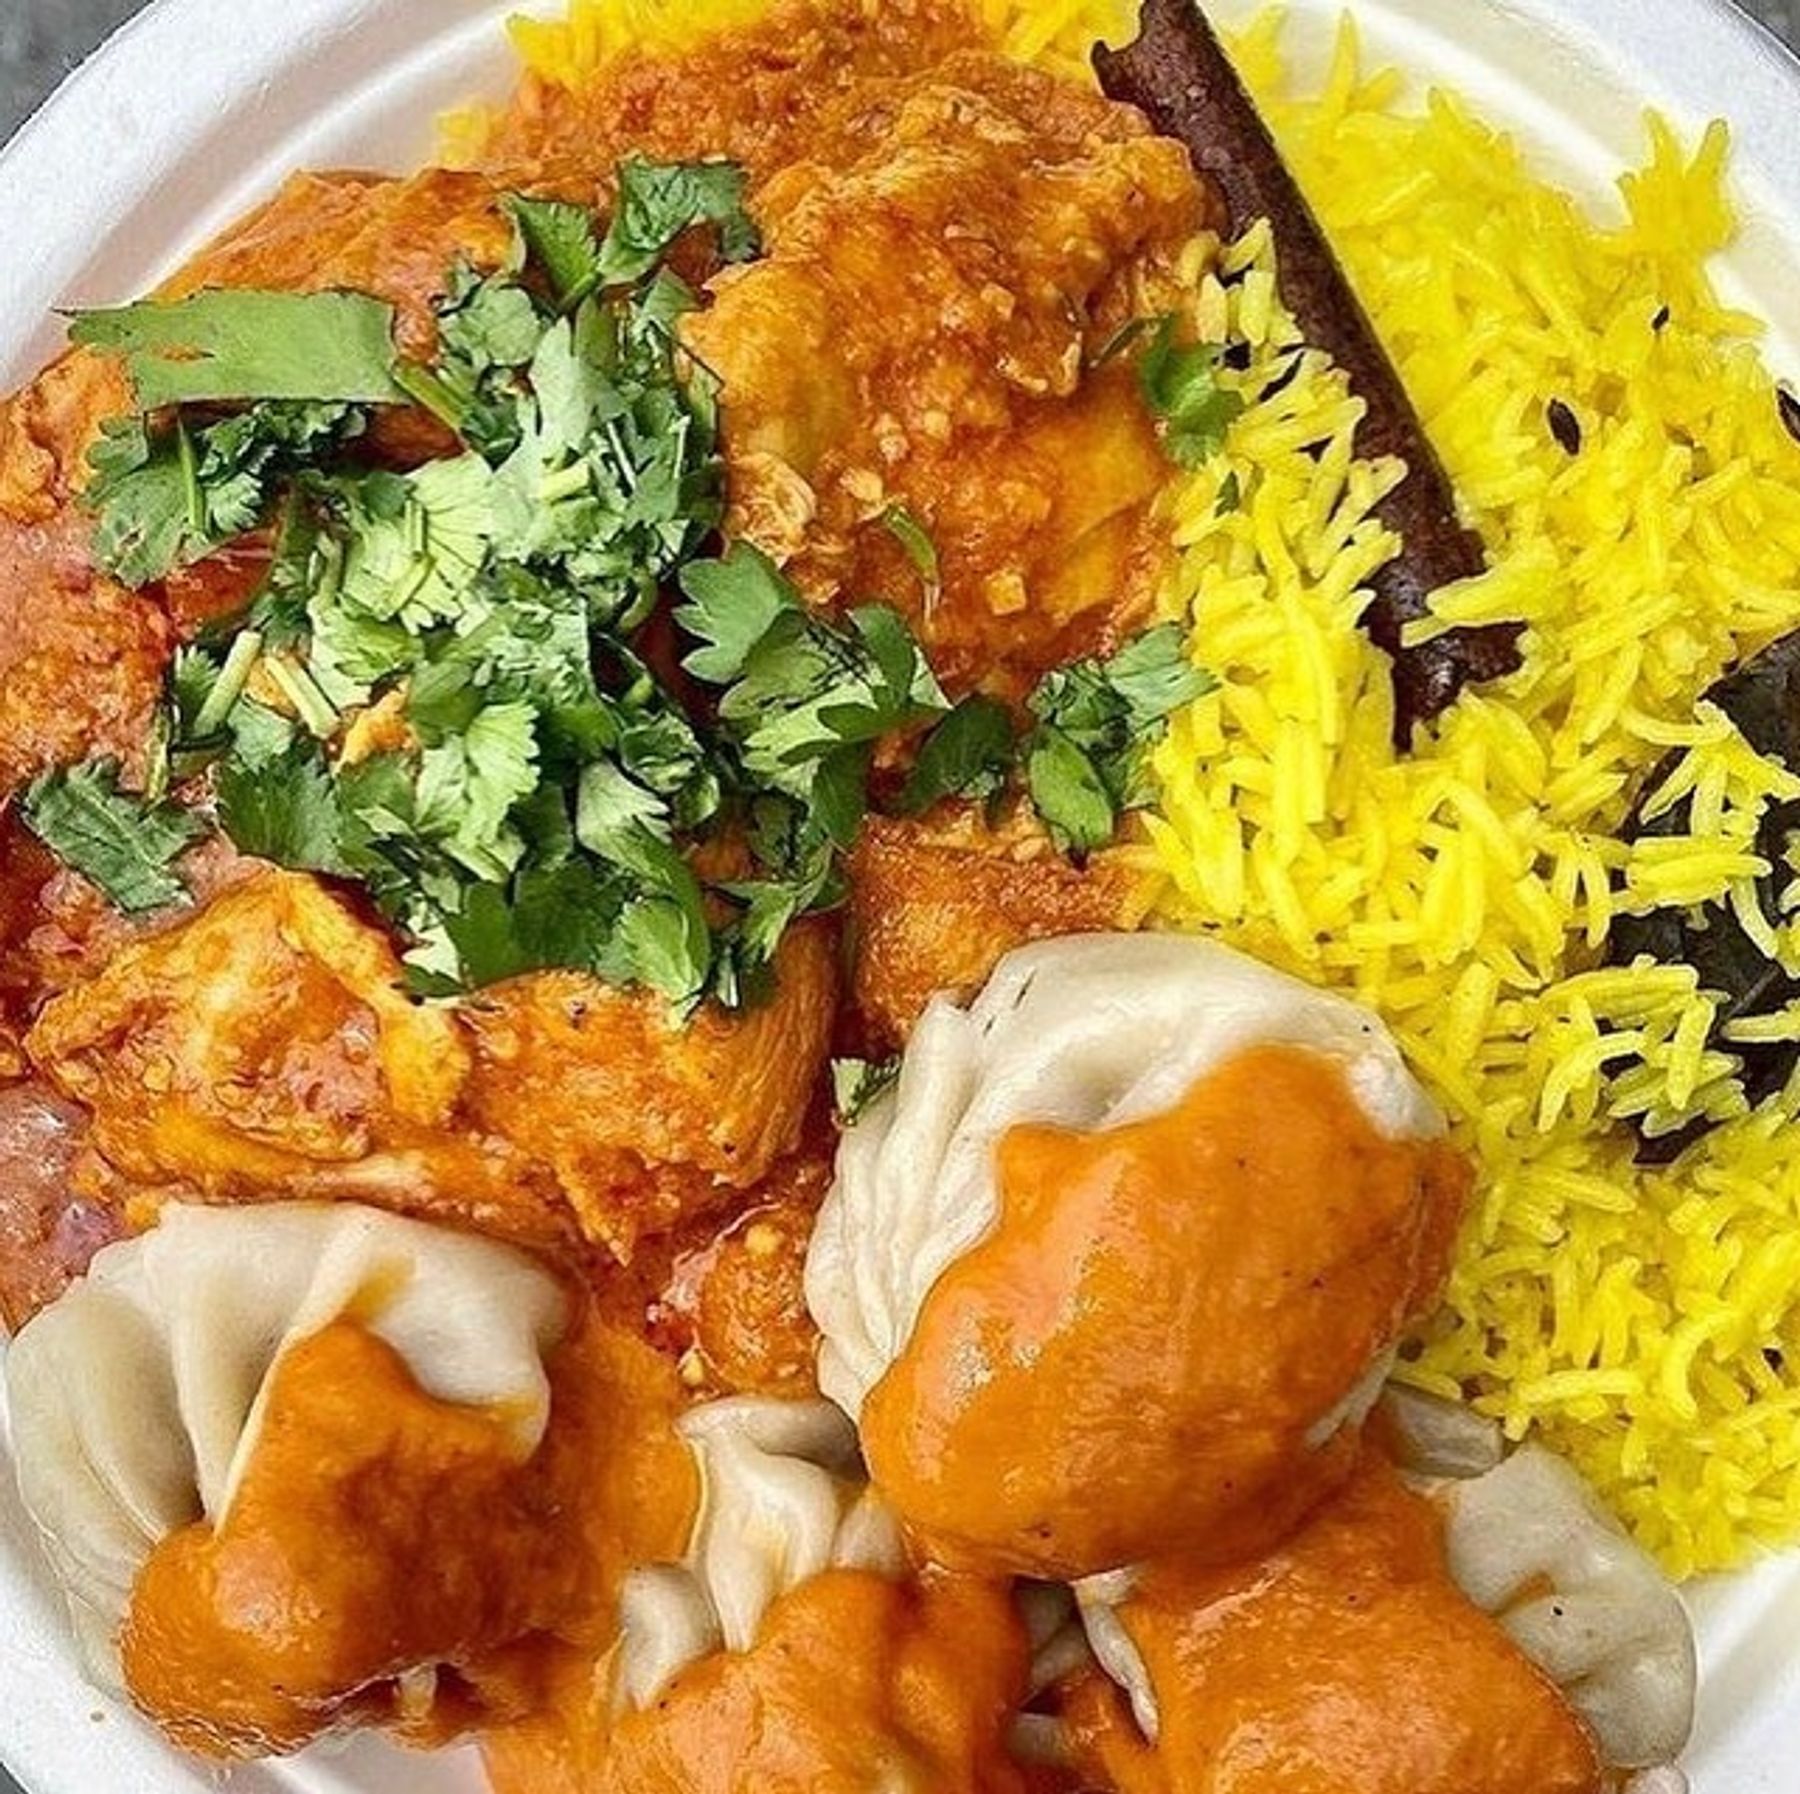 savory food options from Binis kitchen including rice, momos, and curry